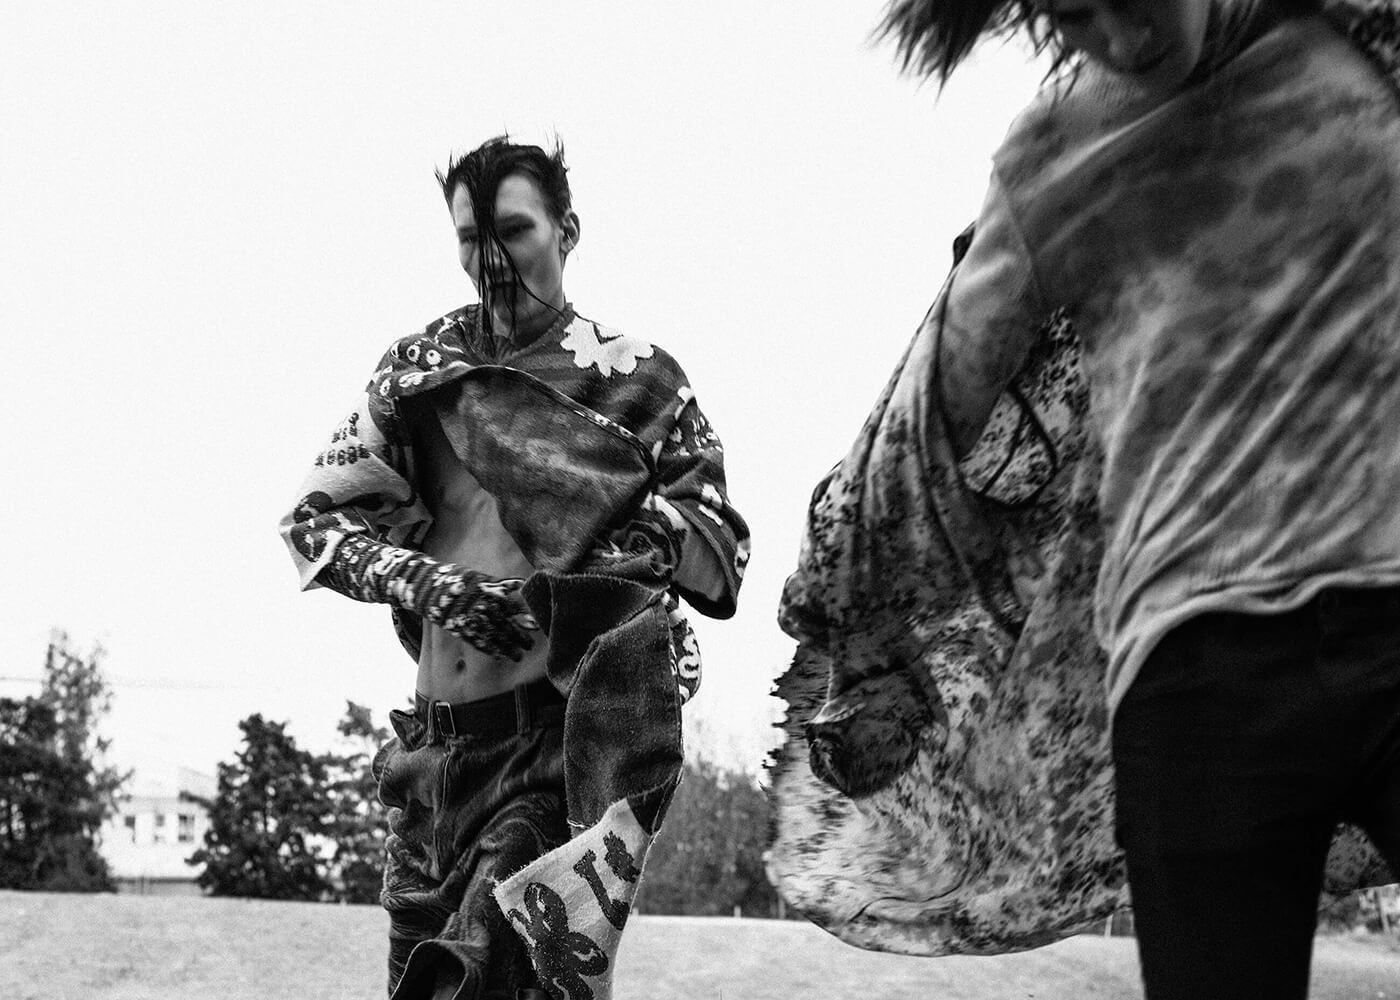 A black and white portrait of two young punk men running outdoors